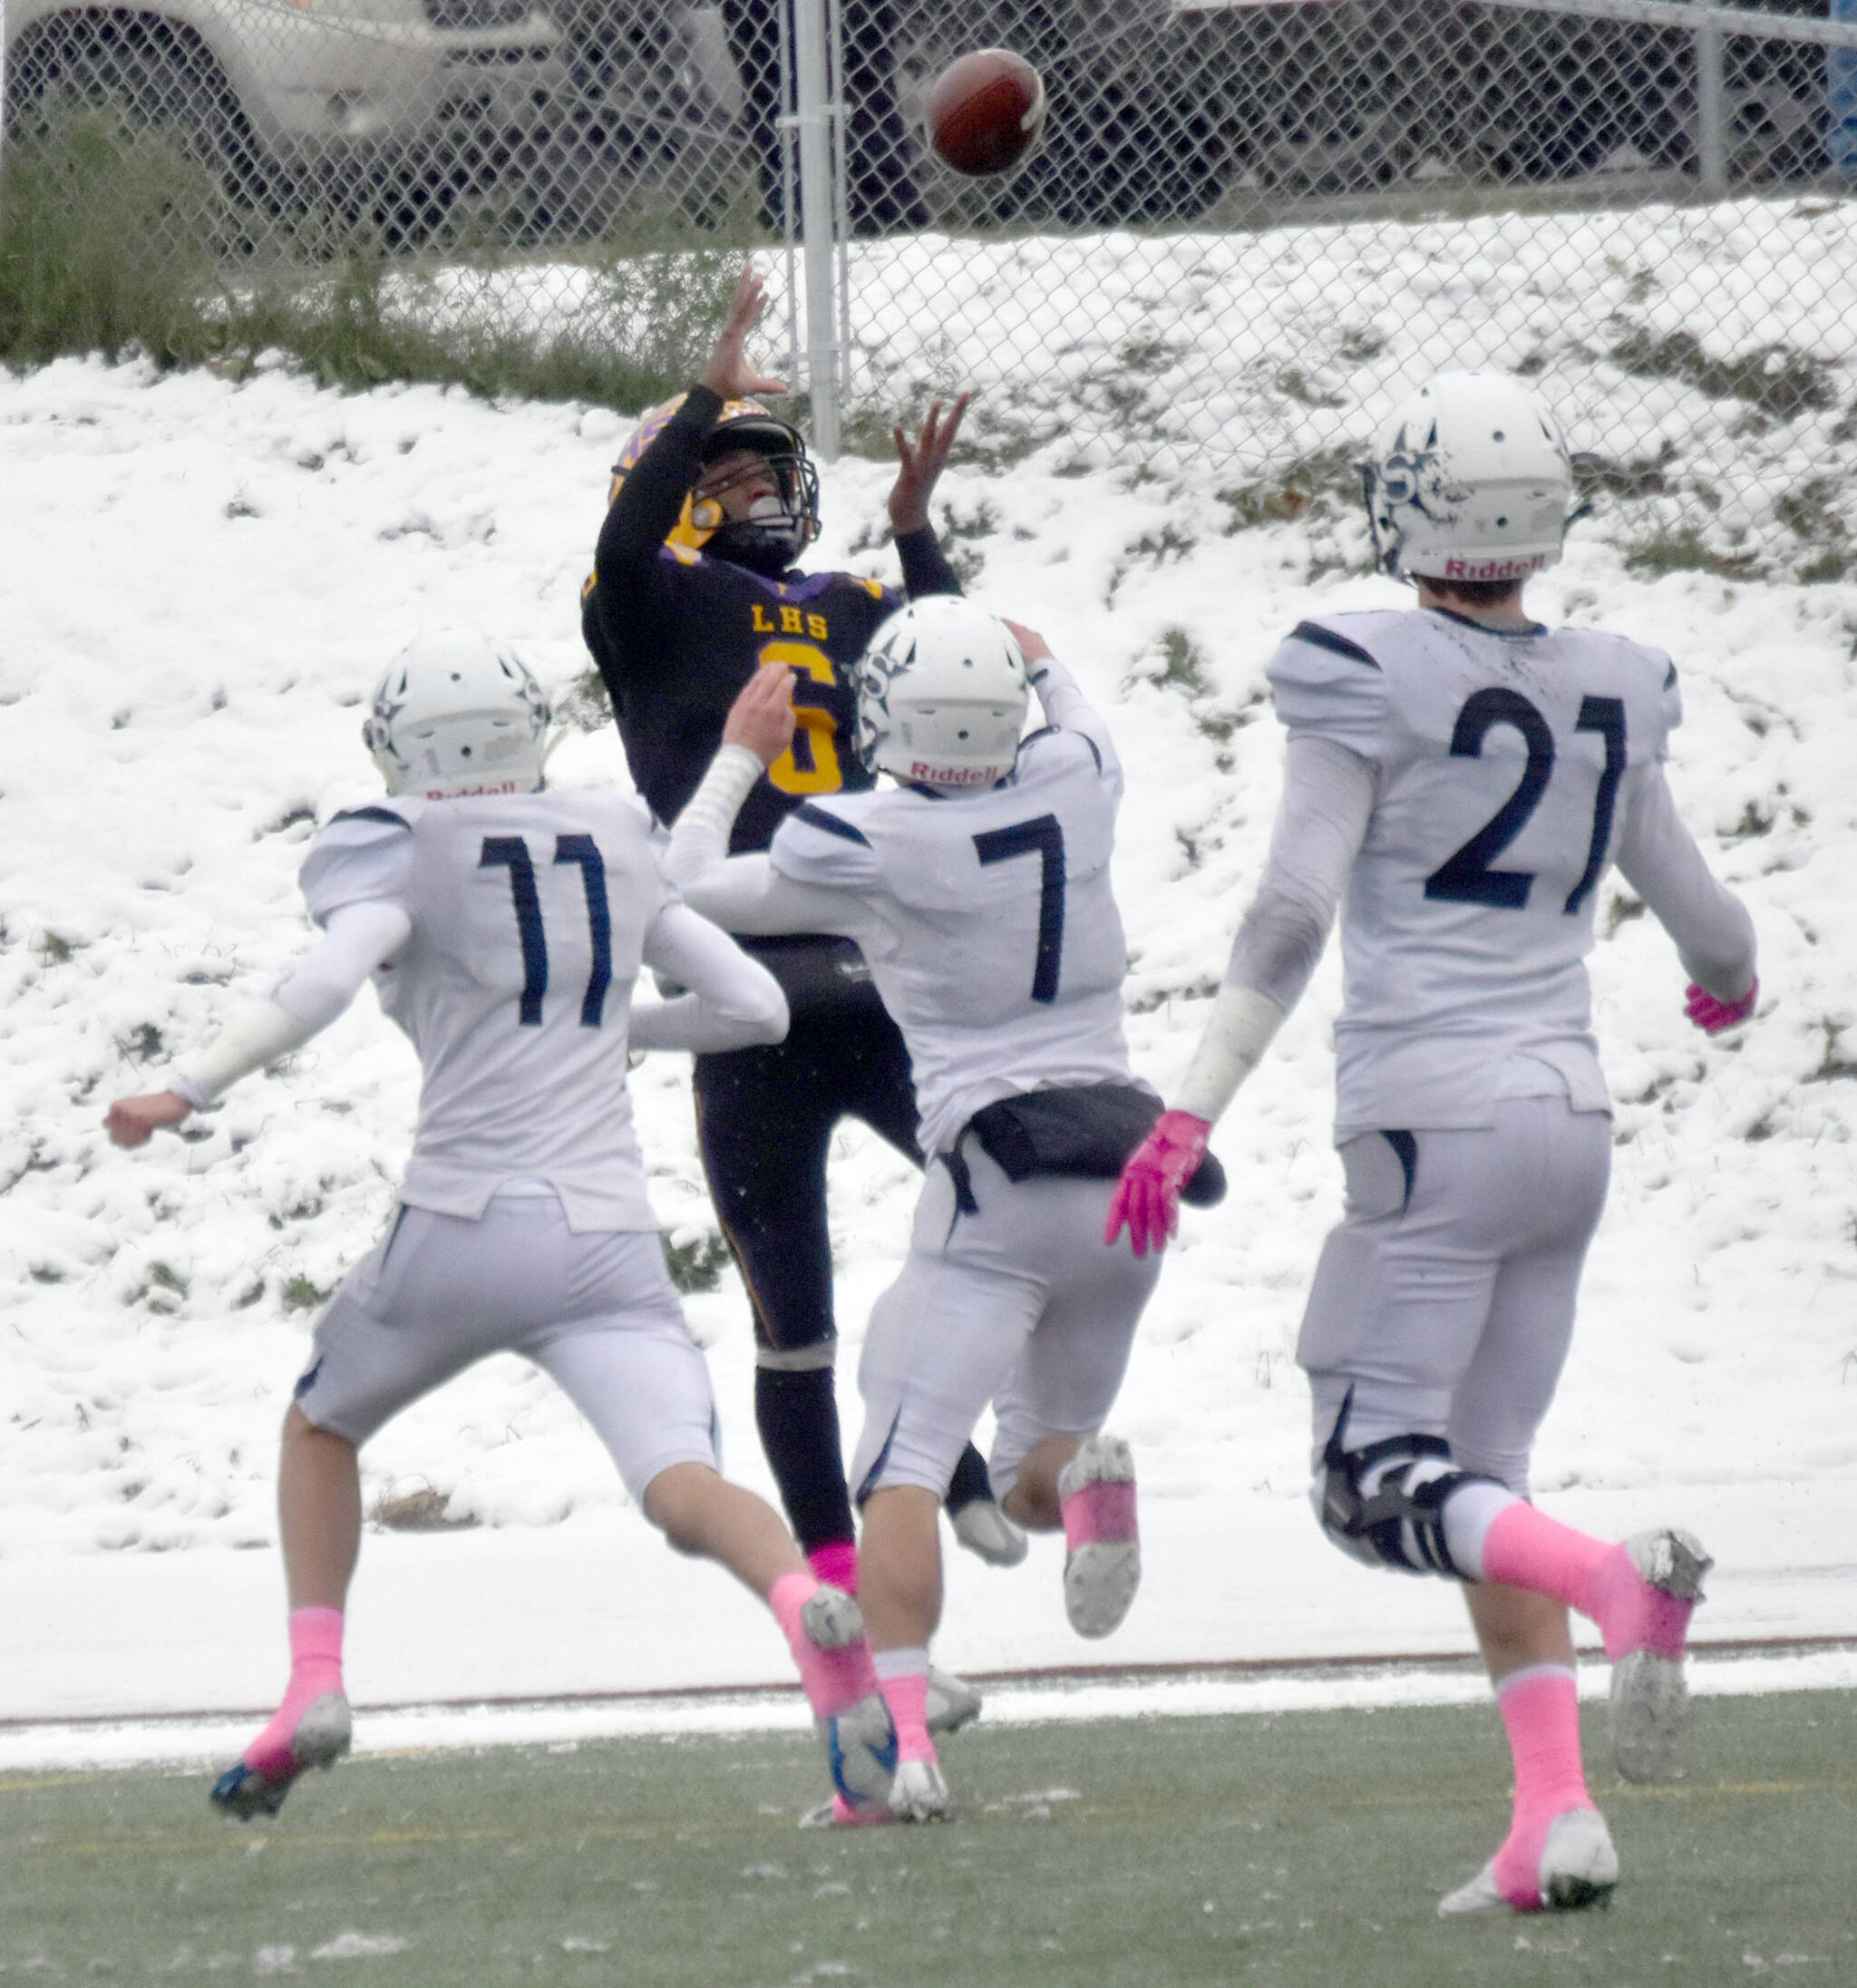 Lathrop’s Earl Parker catches a touchdown over Soldotna’s Talon Gavalis and Zac Buckbee on Saturday, Oct. 15, 2022, in the Division II state championship game at Service High School in Anchorage, Alaska. (Photo by Jeff Helminiak/Peninsula Clarion)